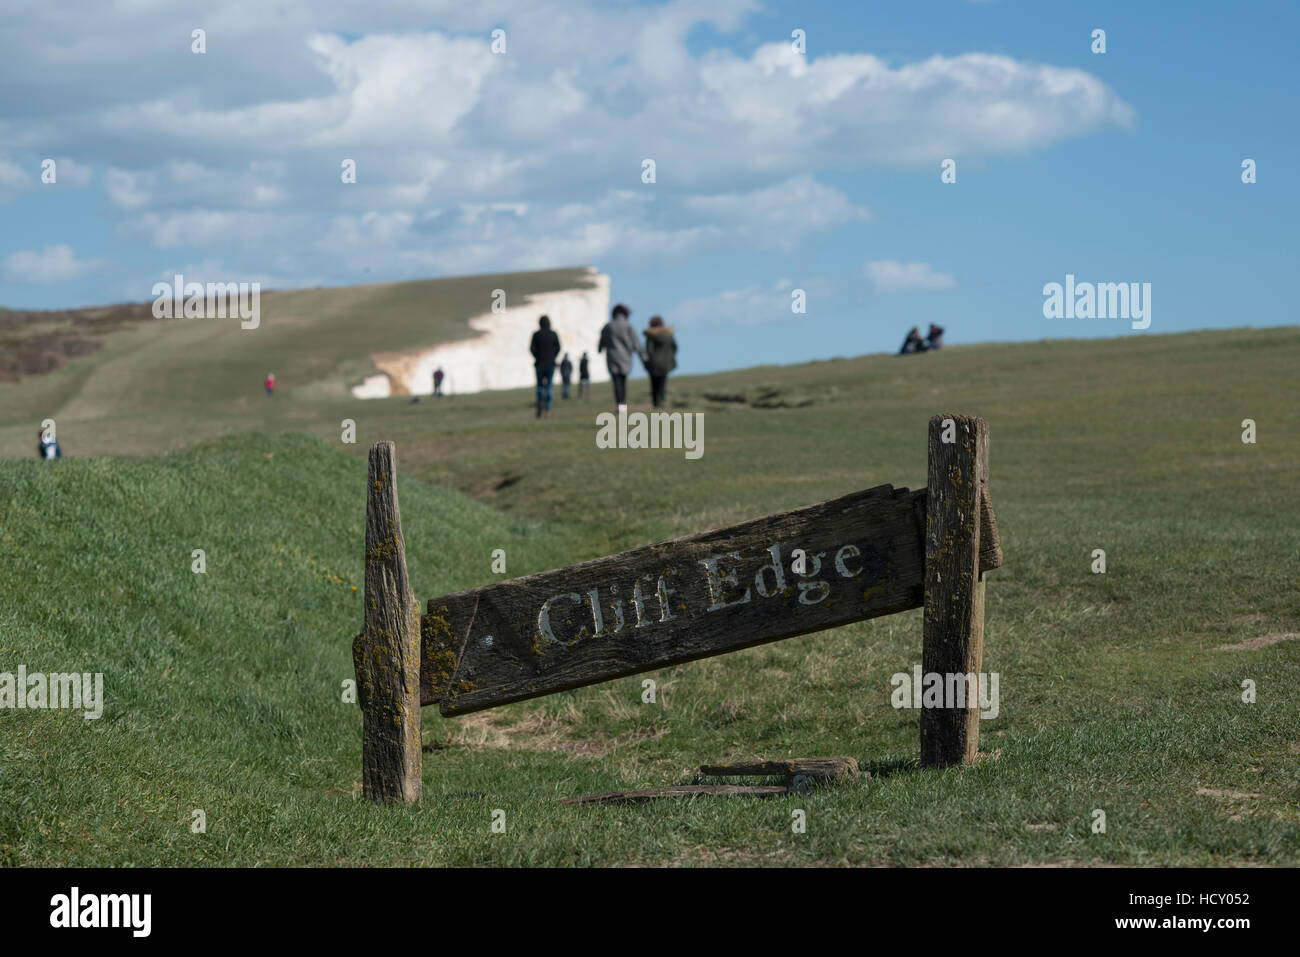 A warning sign near the cliffs at Beachy Head on the south coast, South Downs National Park, East Sussex, UK Stock Photo